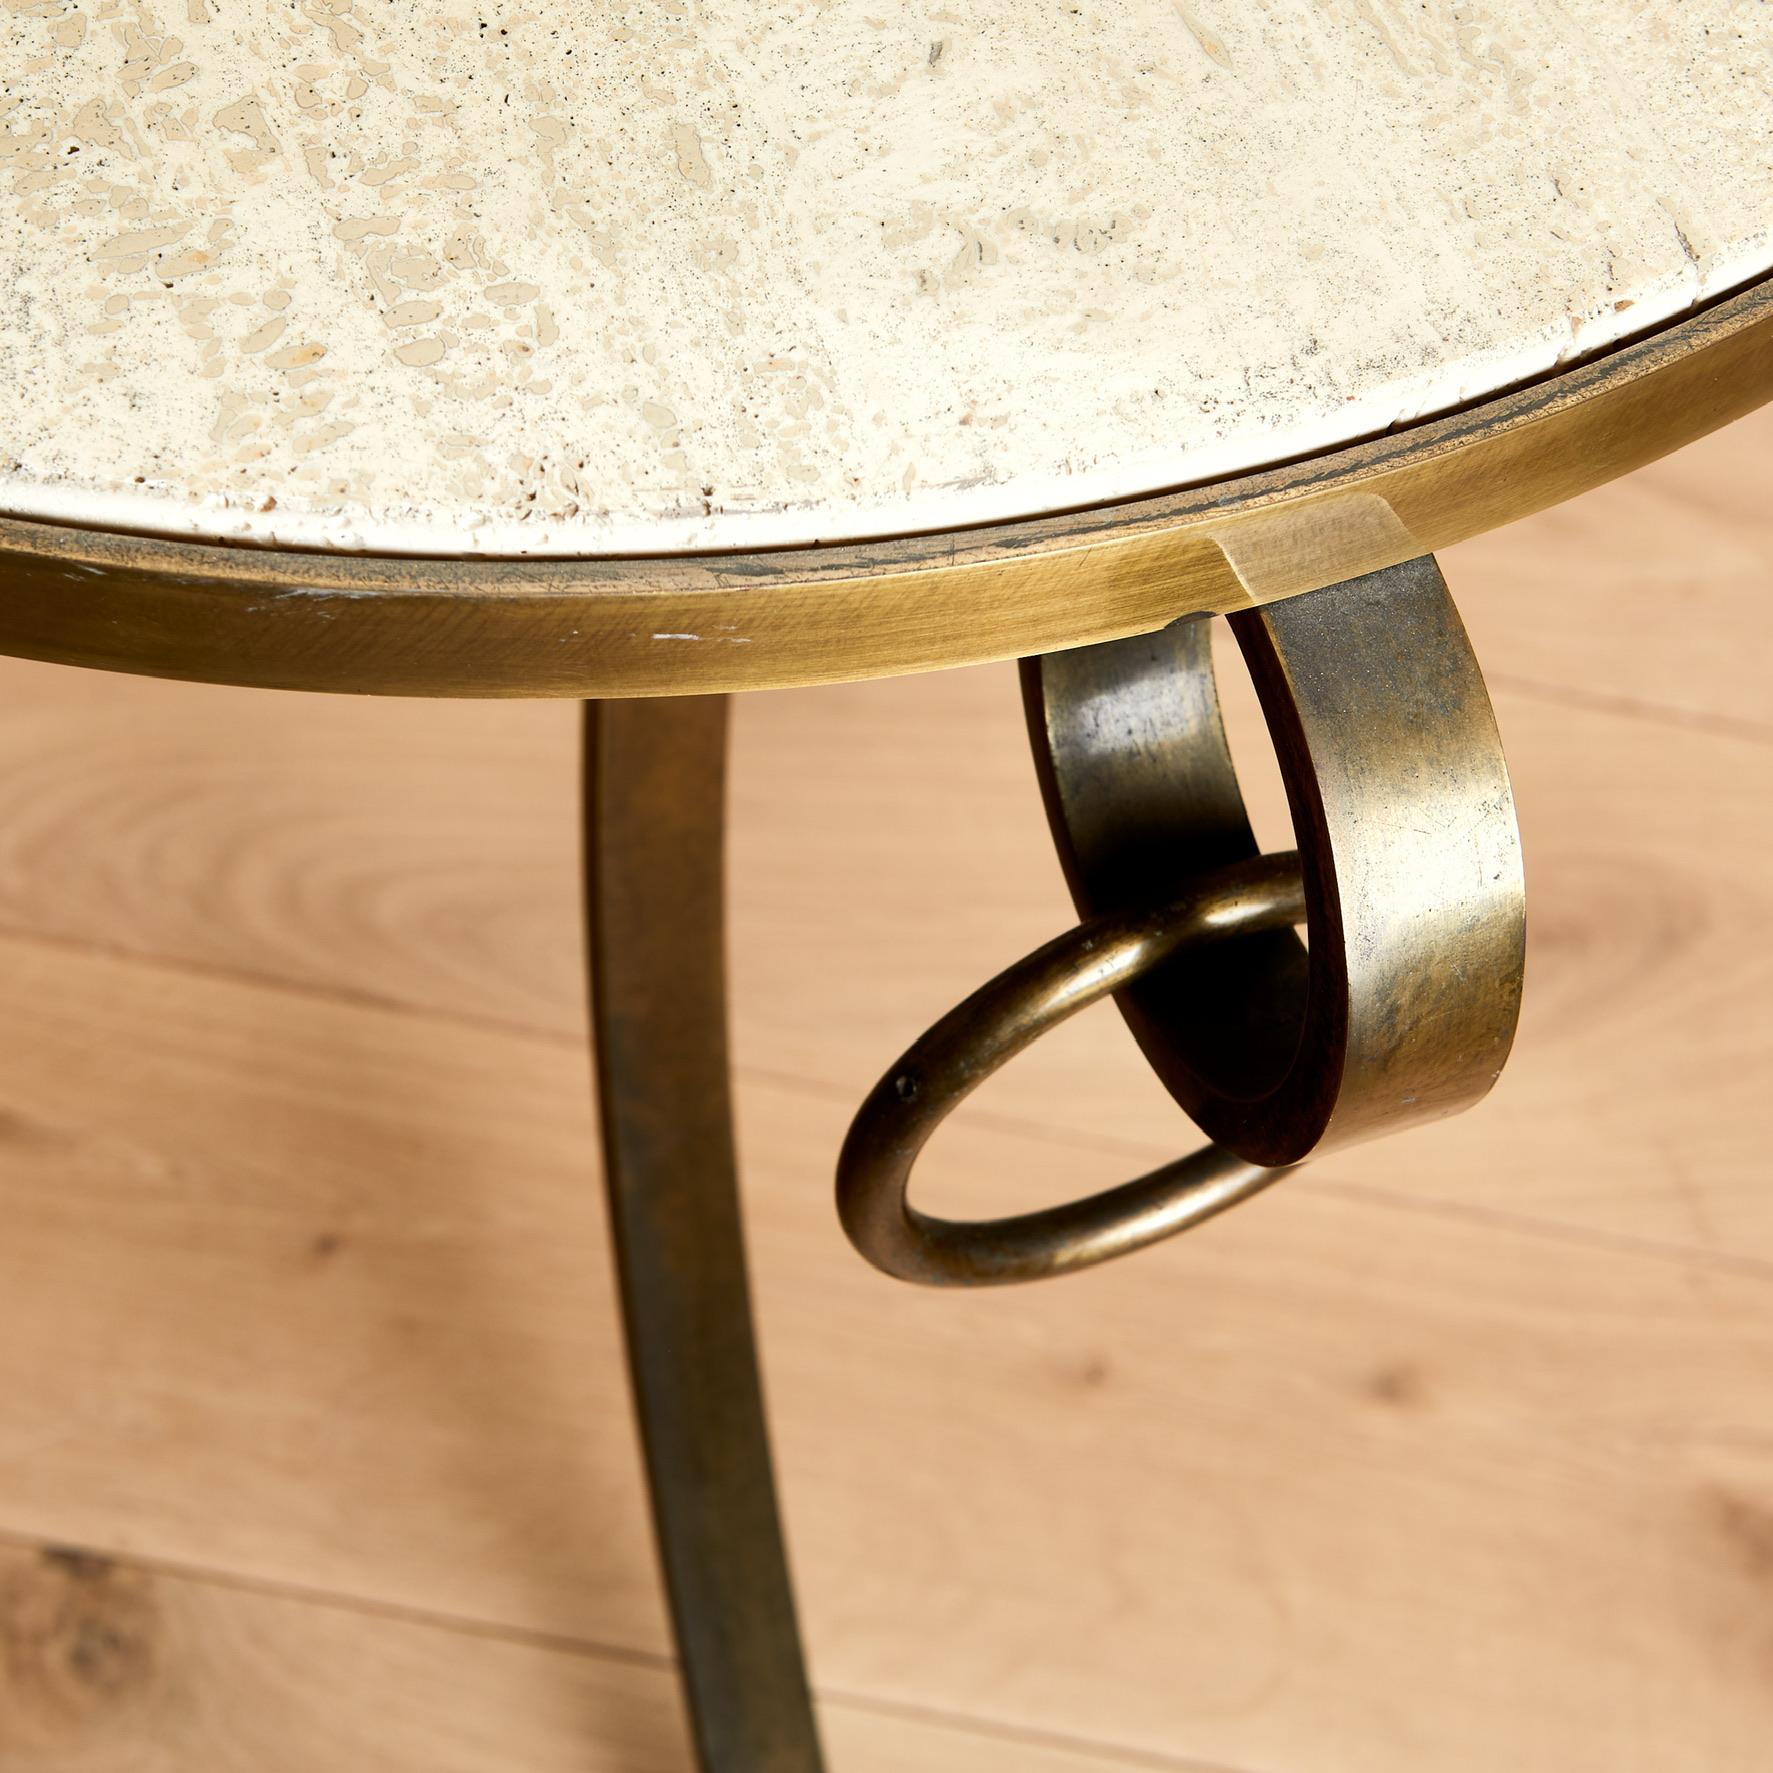 Pair of Neo Classic Pedestal Tables, Silver Iron and Brass Frame, Travertine Top 1